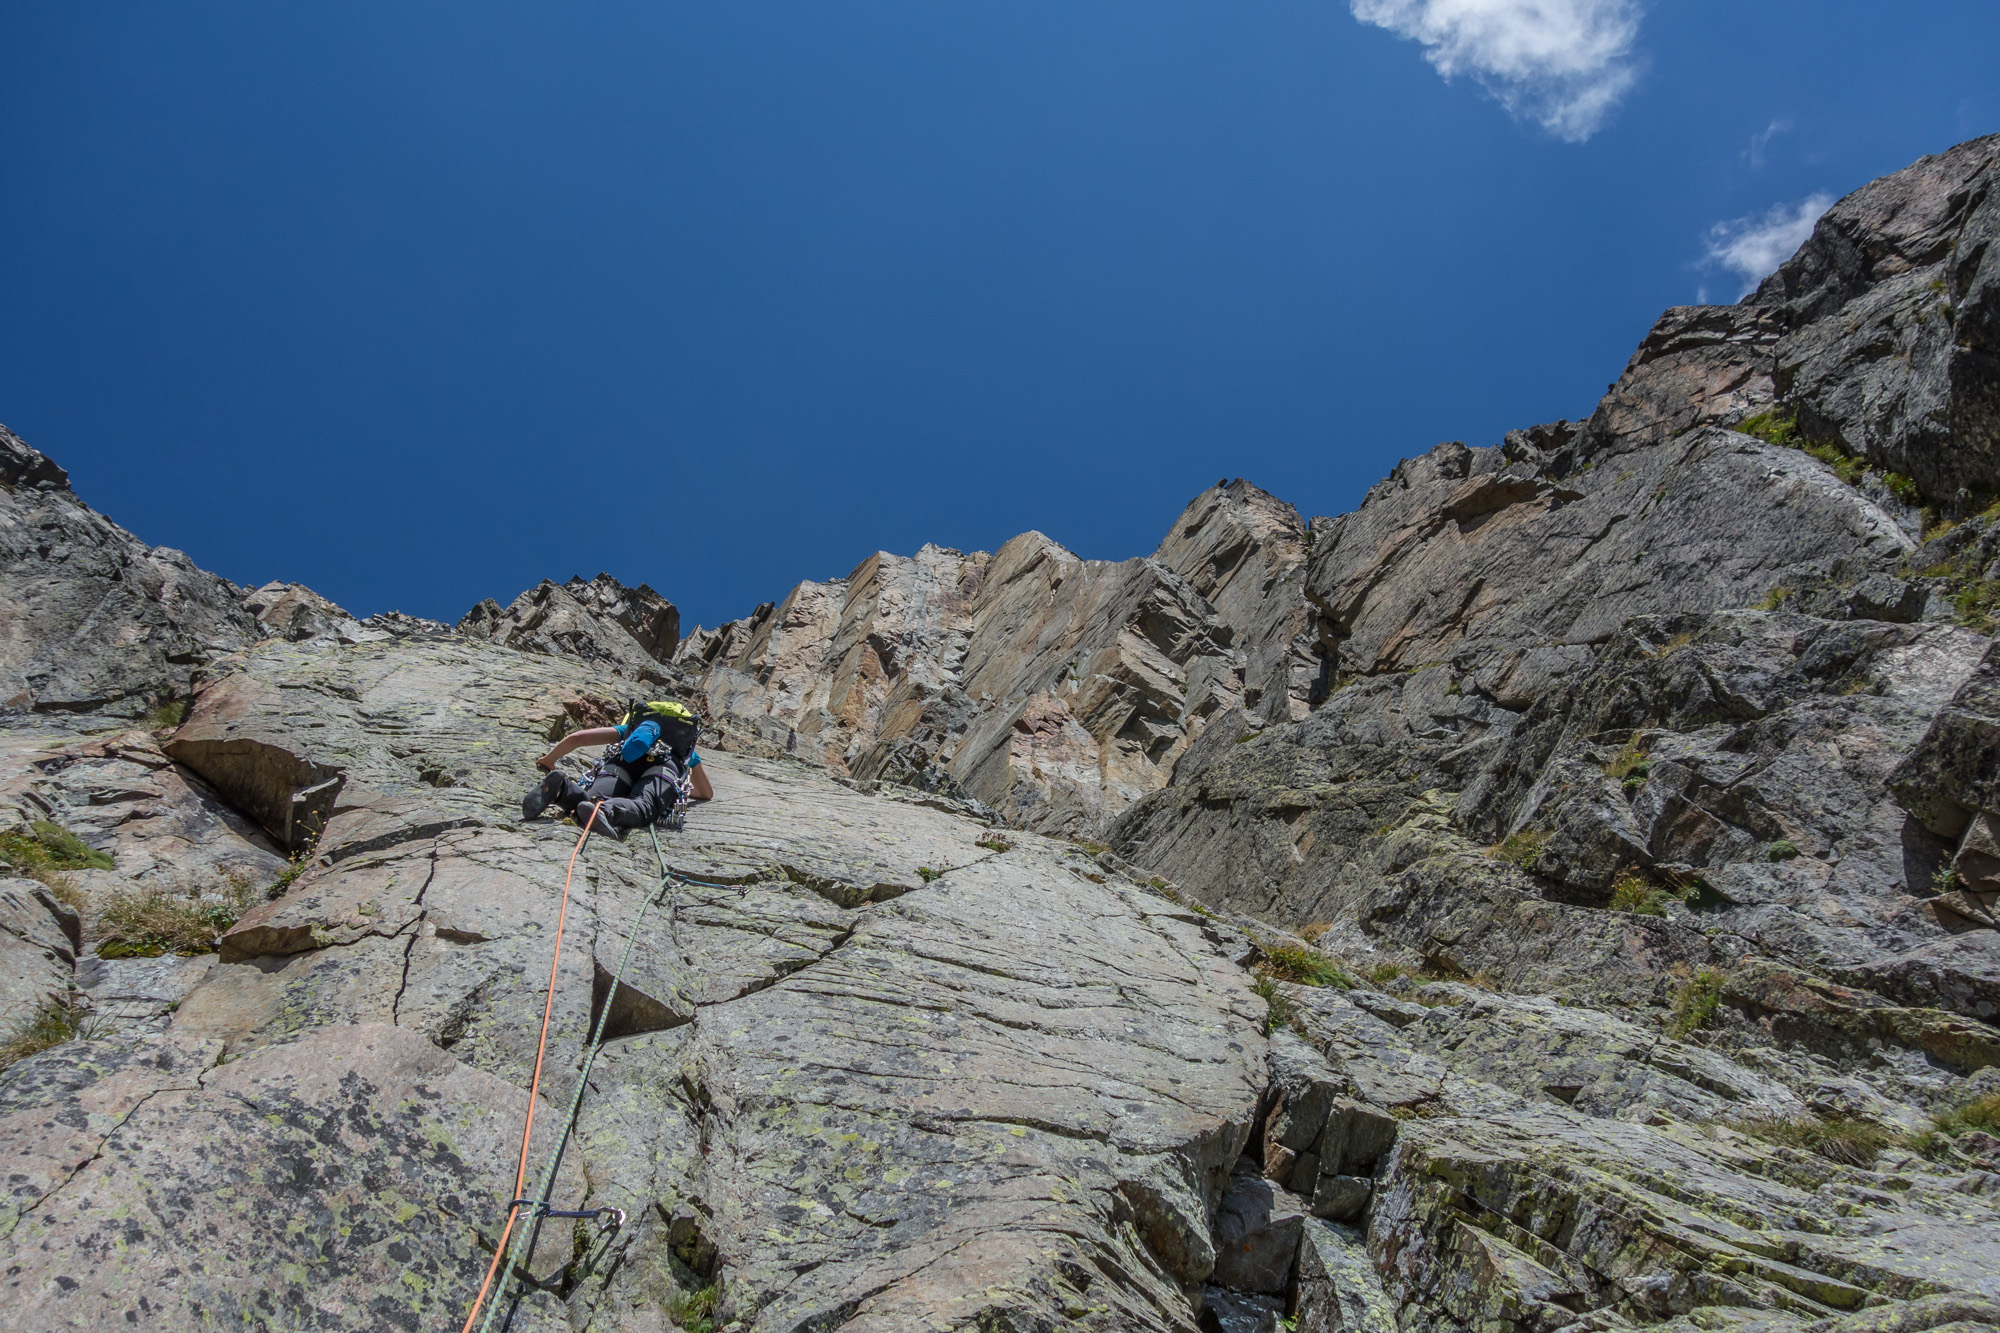 Great climbing on the first pitch of L'an d'Emile